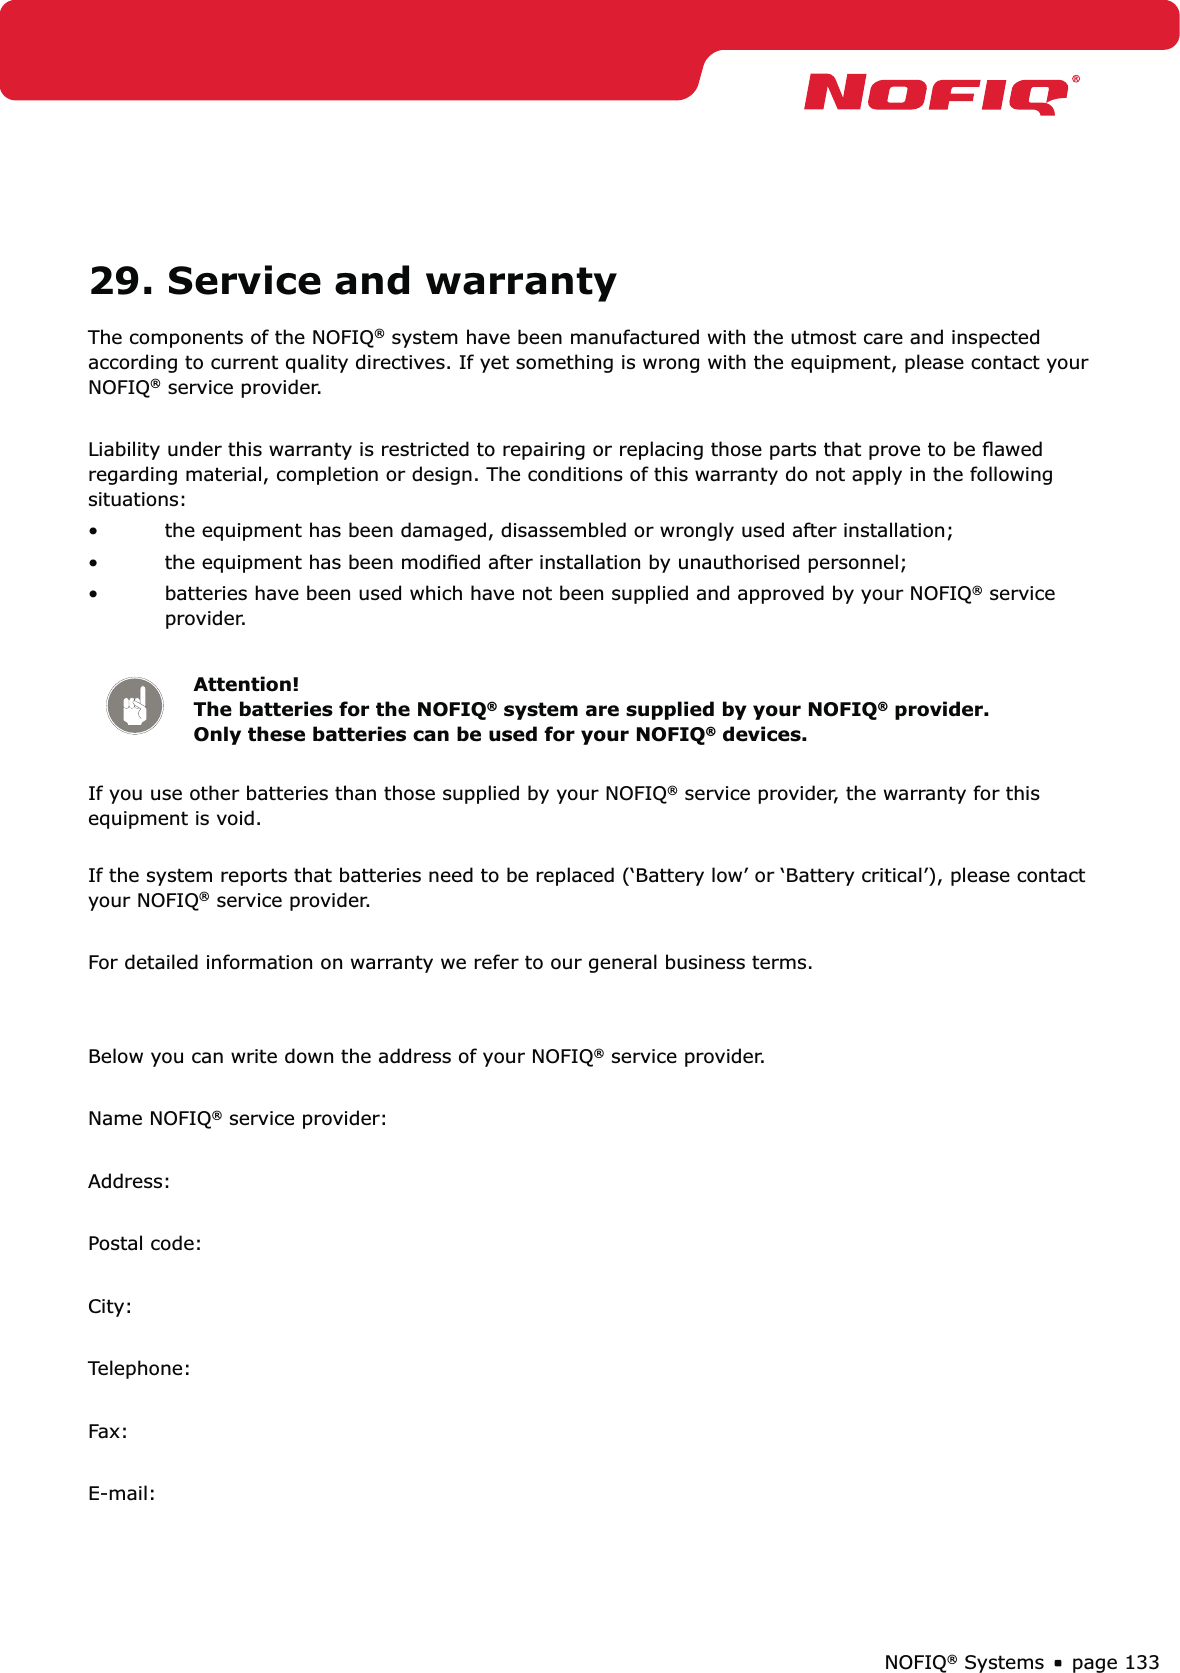 page 133NOFIQ® Systems29. Service and warrantyThe components of the NOFIQ® system have been manufactured with the utmost care and inspected according to current quality directives. If yet something is wrong with the equipment, please contact your NOFIQ® service provider. Liability under this warranty is restricted to repairing or replacing those parts that prove to be ﬂawed regarding material, completion or design. The conditions of this warranty do not apply in the following situations: the equipment has been damaged, disassembled or wrongly used after installation;• the equipment has been modiﬁed after installation by unauthorised personnel;• batteries have been used which have not been supplied and approved by your NOFIQ•  ® service provider.Attention!   The batteries for the NOFIQ® system are supplied by your NOFIQ® provider. Only these batteries can be used for your NOFIQ® devices.If you use other batteries than those supplied by your NOFIQ® service provider, the warranty for this equipment is void.  If the system reports that batteries need to be replaced (‘Battery low’ or ‘Battery critical’), please contact your NOFIQ® service provider.For detailed information on warranty we refer to our general business terms. Below you can write down the address of your NOFIQ® service provider.Name NOFIQ® service provider:Address:Postal code:City: Telephone:Fax:E-mail: